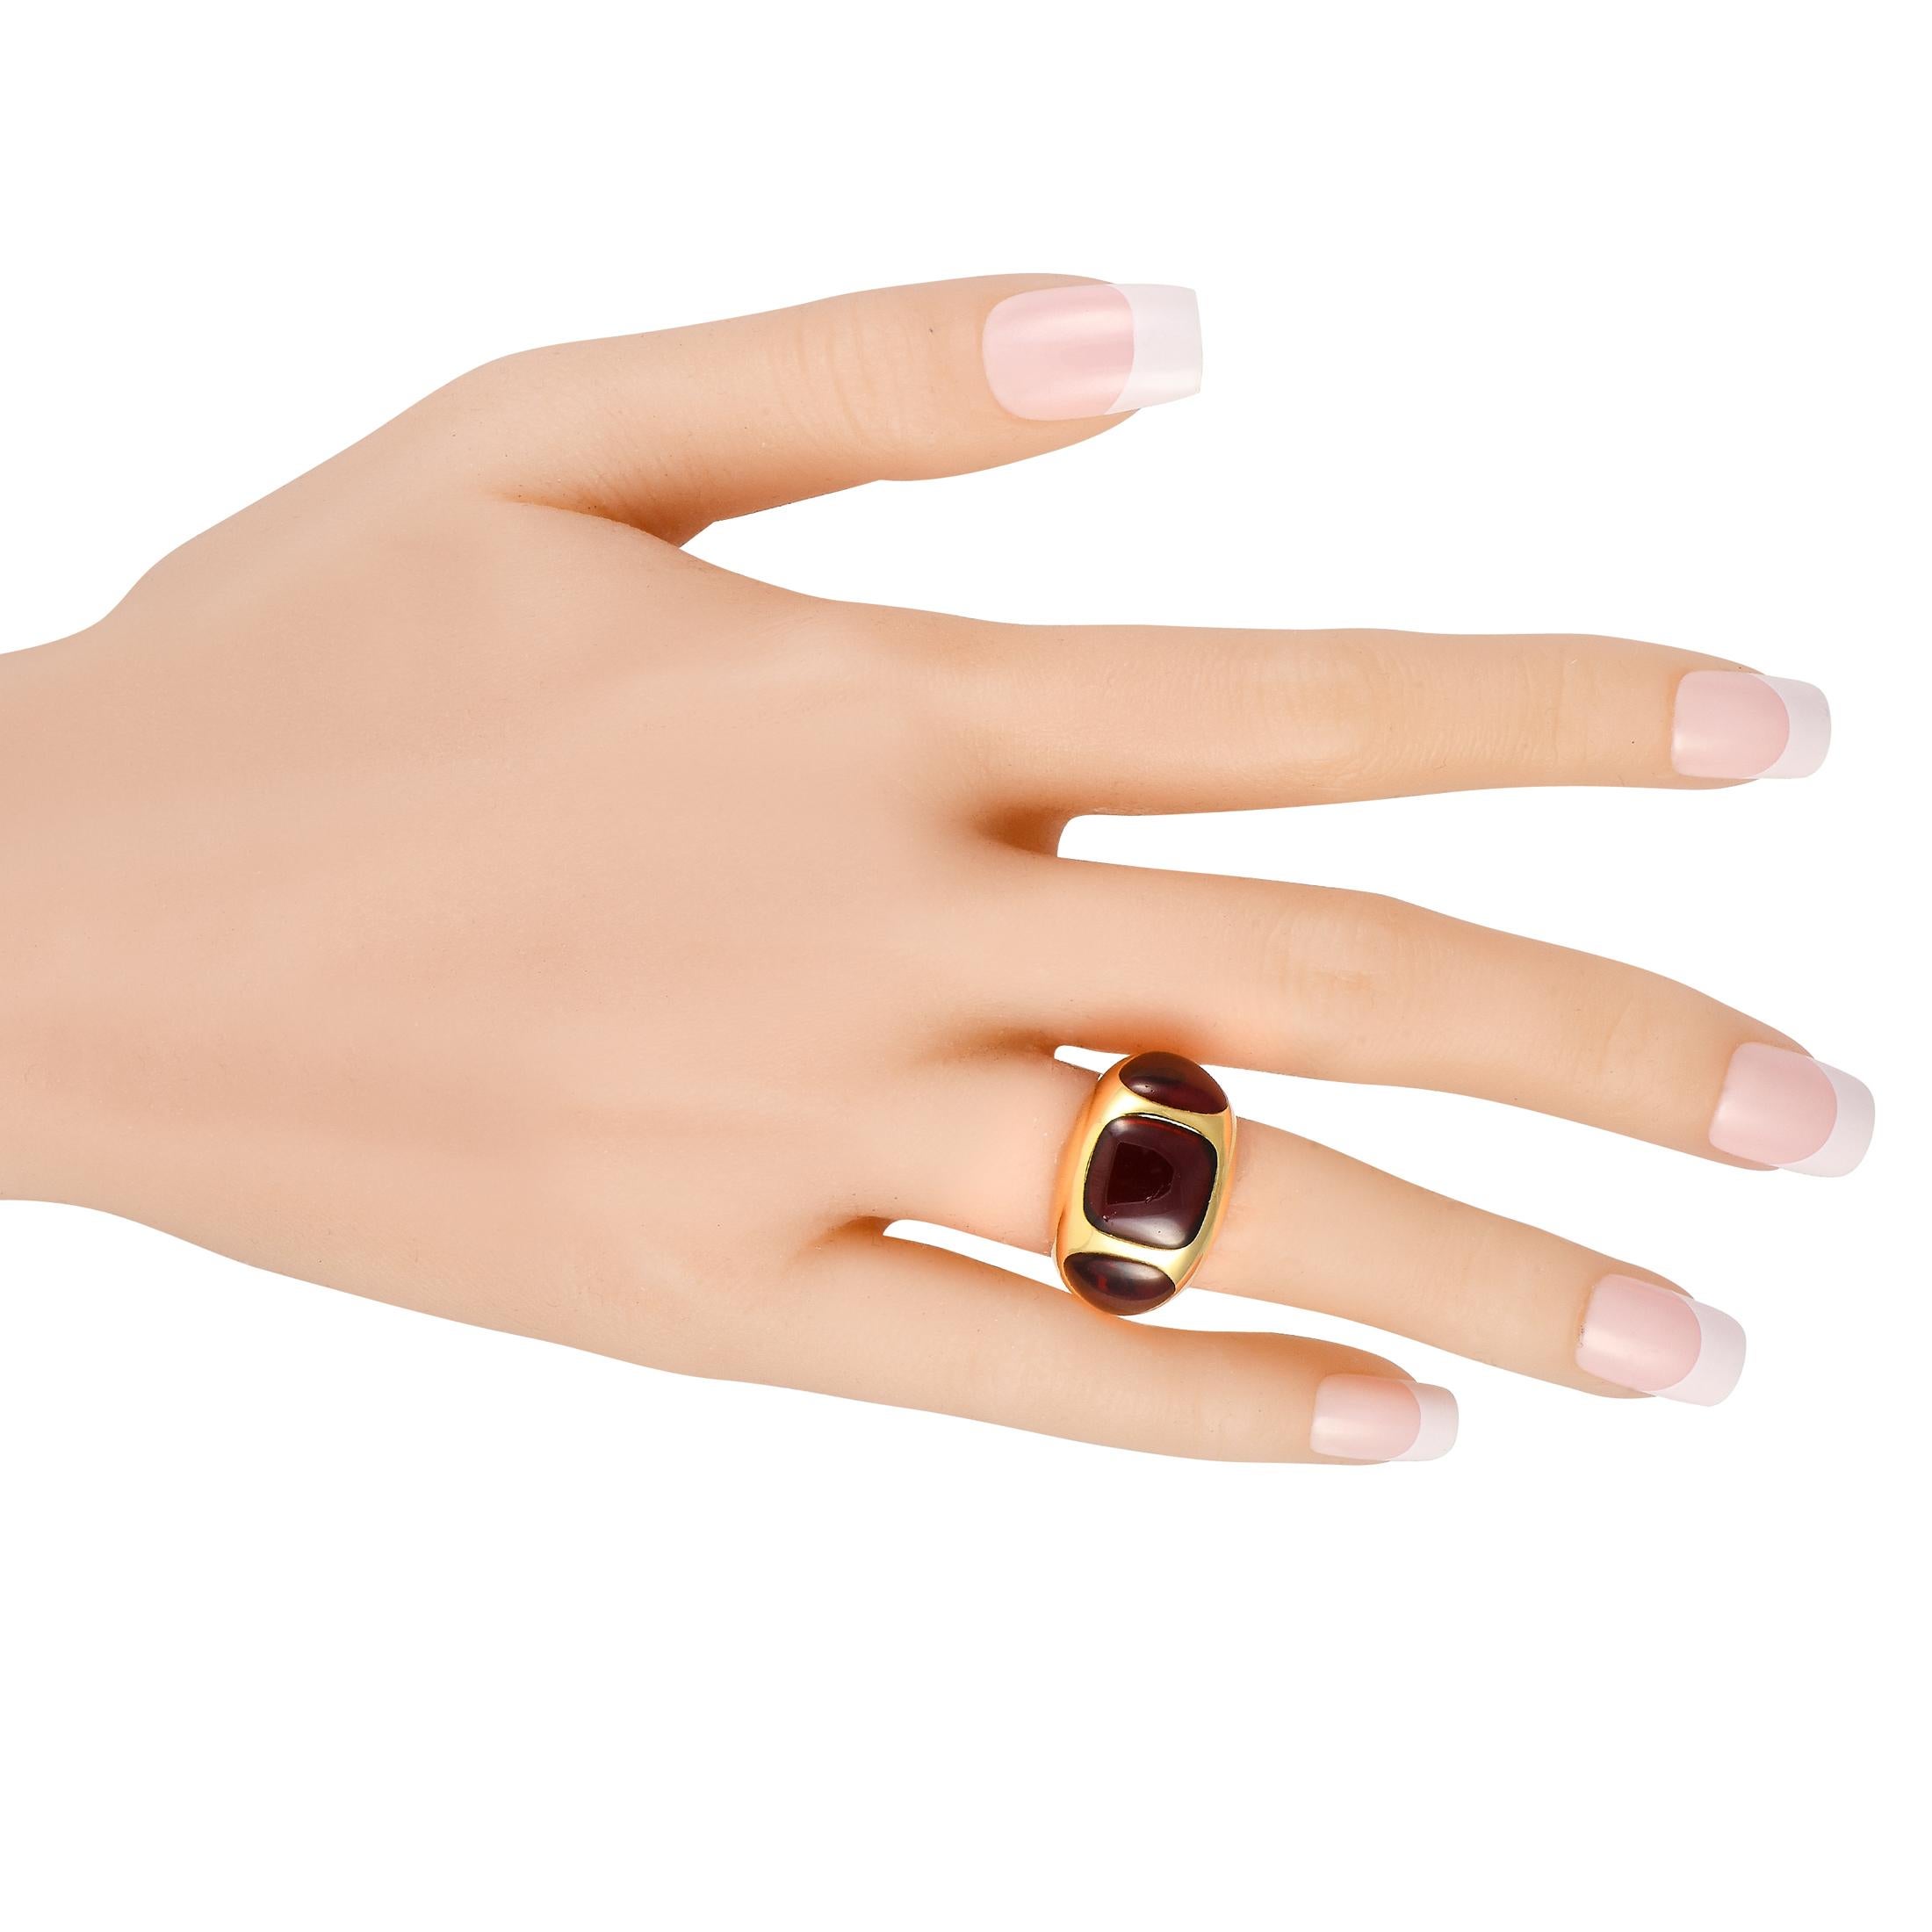 A chunky ring from Pomellato's Bisanzio Collection. This eye-catching cocktail ring features a domed band in 18K yellow gold. Three garnet cabochons in closed settings punctuate the widest part of the shank. The ring's top dimensions measure 17mm x